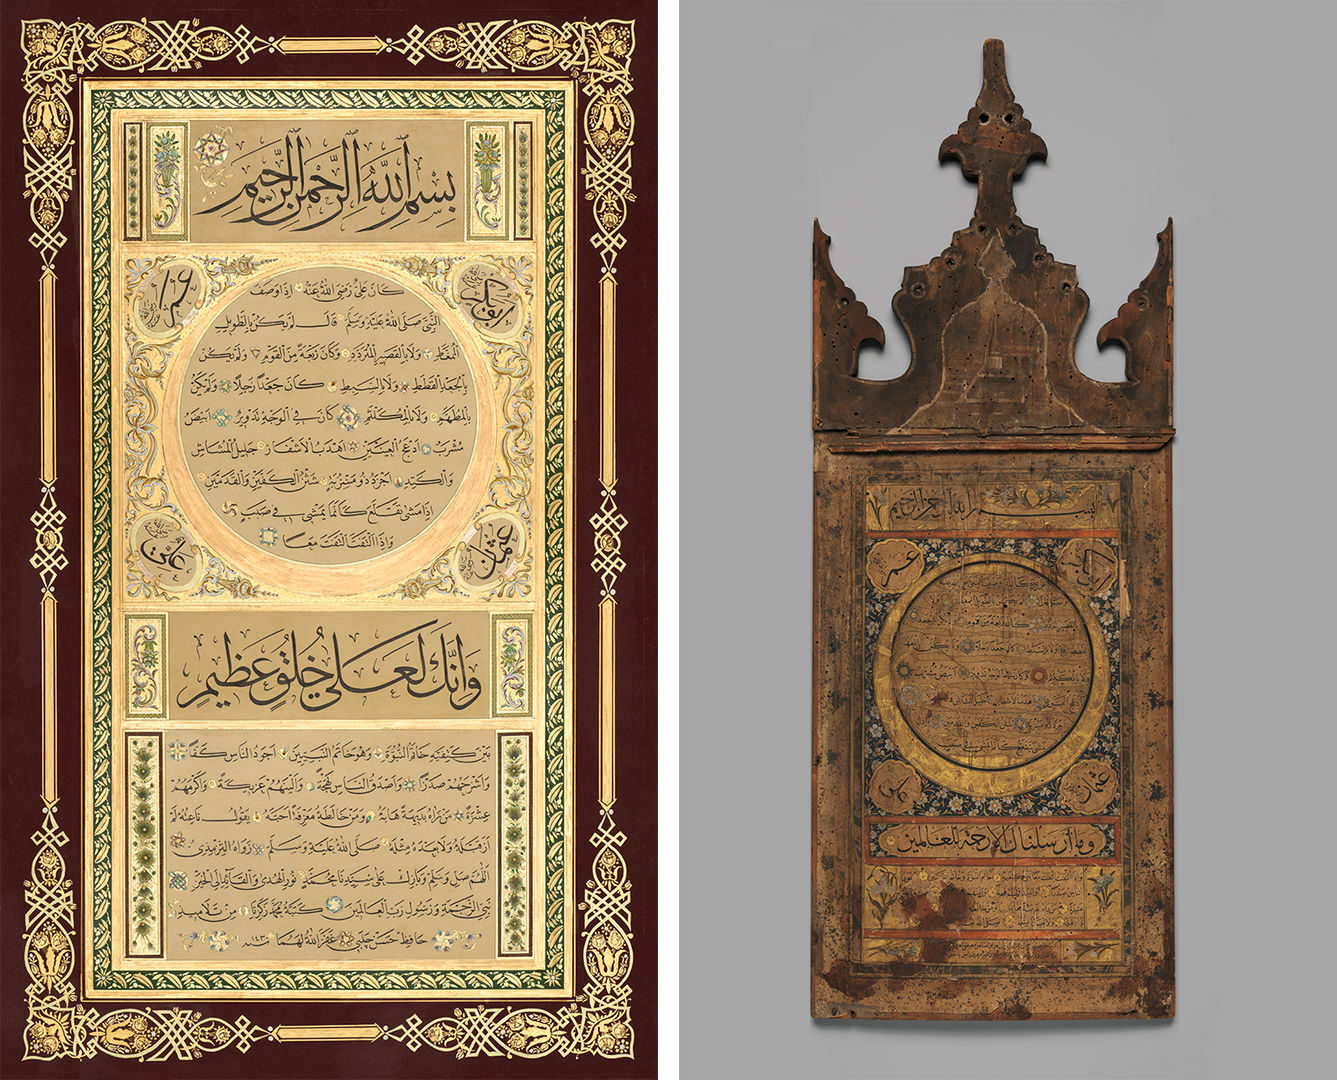 a side by side of two artworks, a contemporary hilye with a deep red border, gold detailing, and calligraphy on the left, and an 18th century wooden hilya with watercolor, ink, and gold on the right